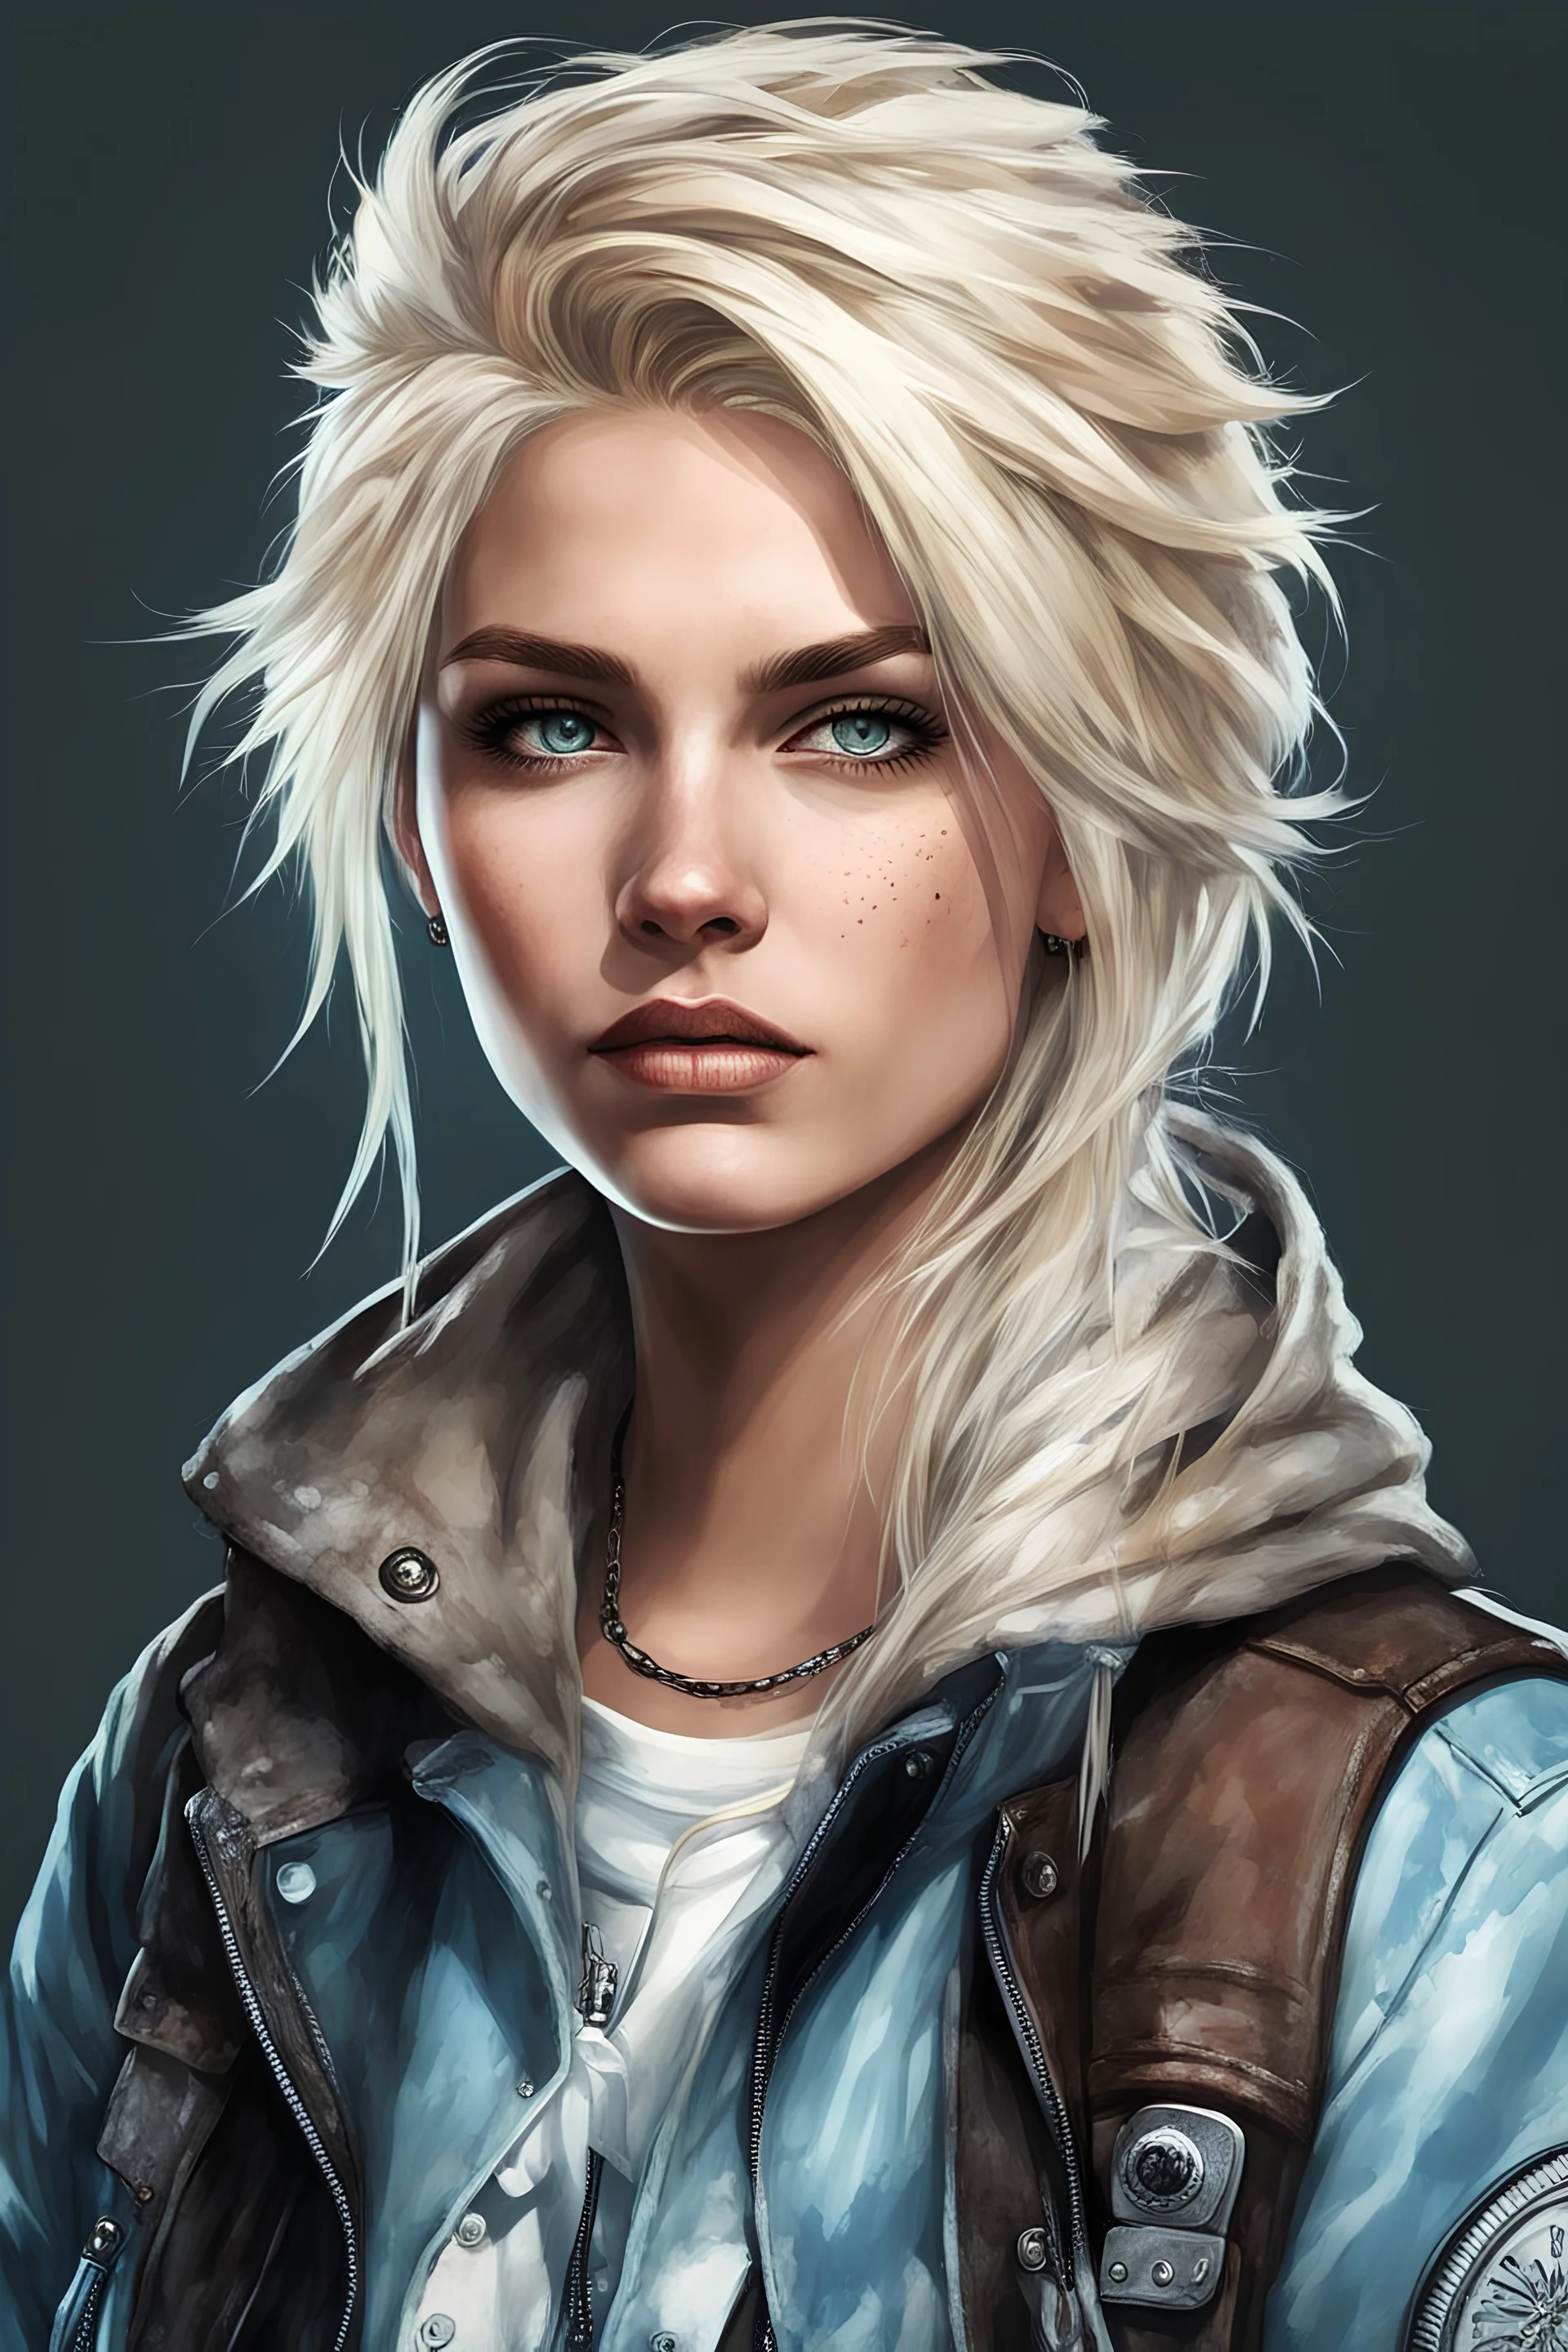 highly detailed portrait of a sewer punk swedish lady, jacket, blonde hair gradient light blue, brown, blonde cream and white color scheme, grunge aesthetic.